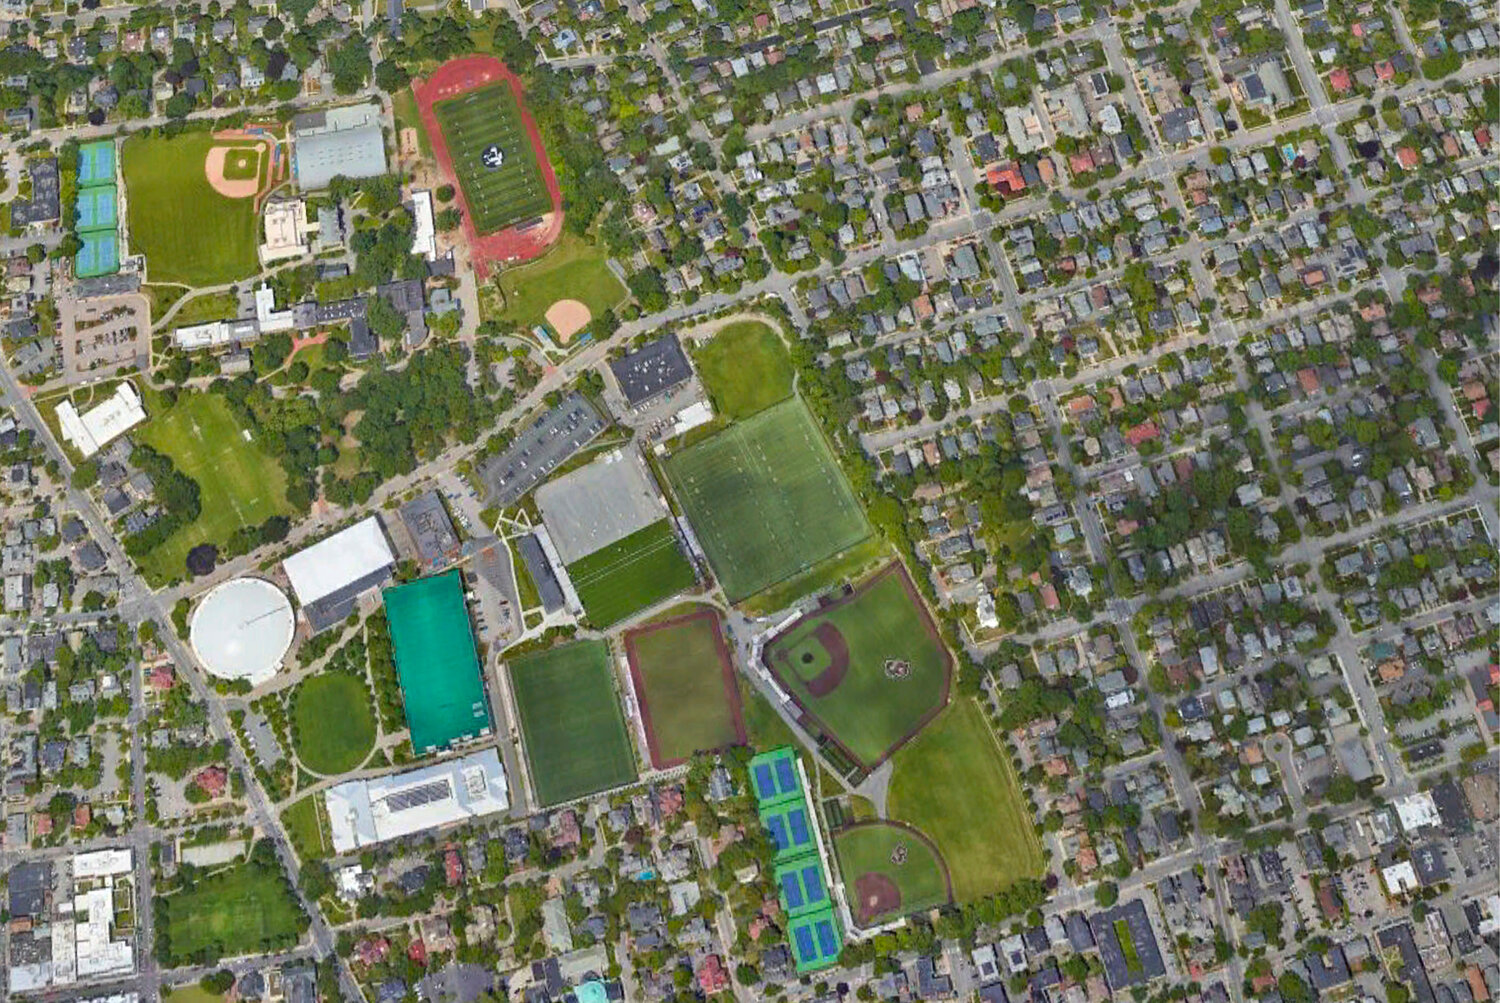 The land that once housed a “poor farm” built in 1835 on the East Side is now a Brown University sports complex